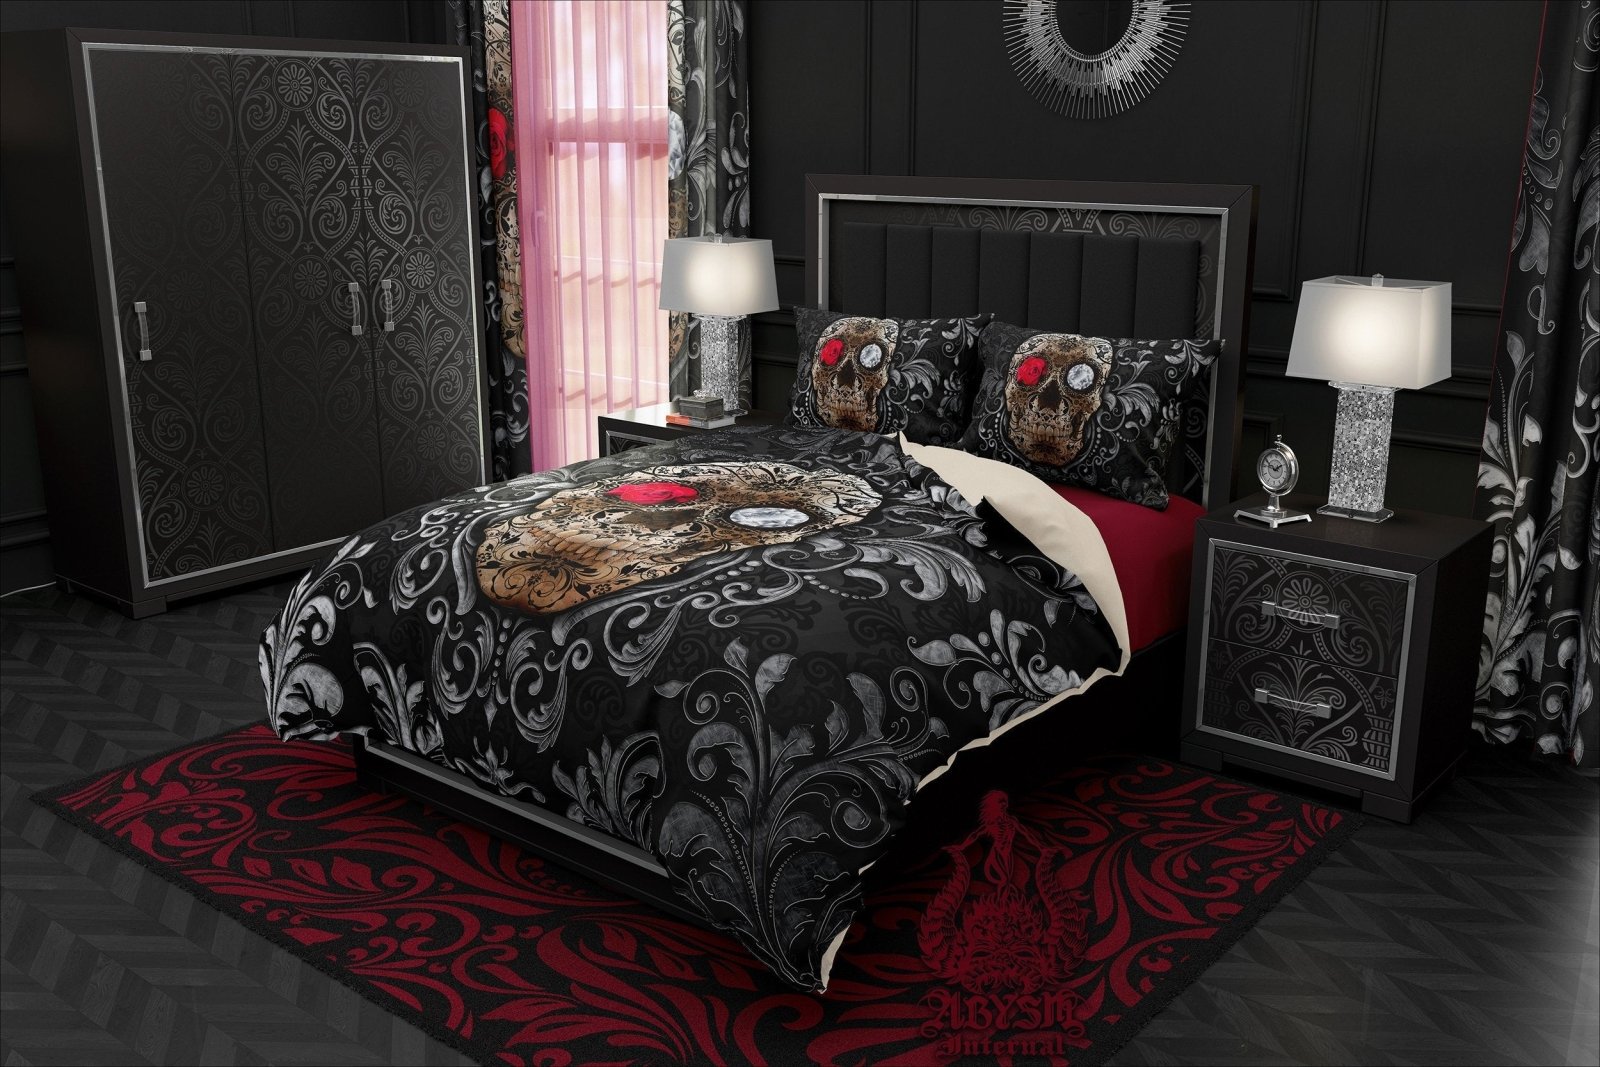 Gothic Sugar Skull Bedding Set, Comforter and Duvet, Goth Bed Cover and Bedroom Decor, King, Queen and Twin Size - Day of the Dead - Abysm Internal